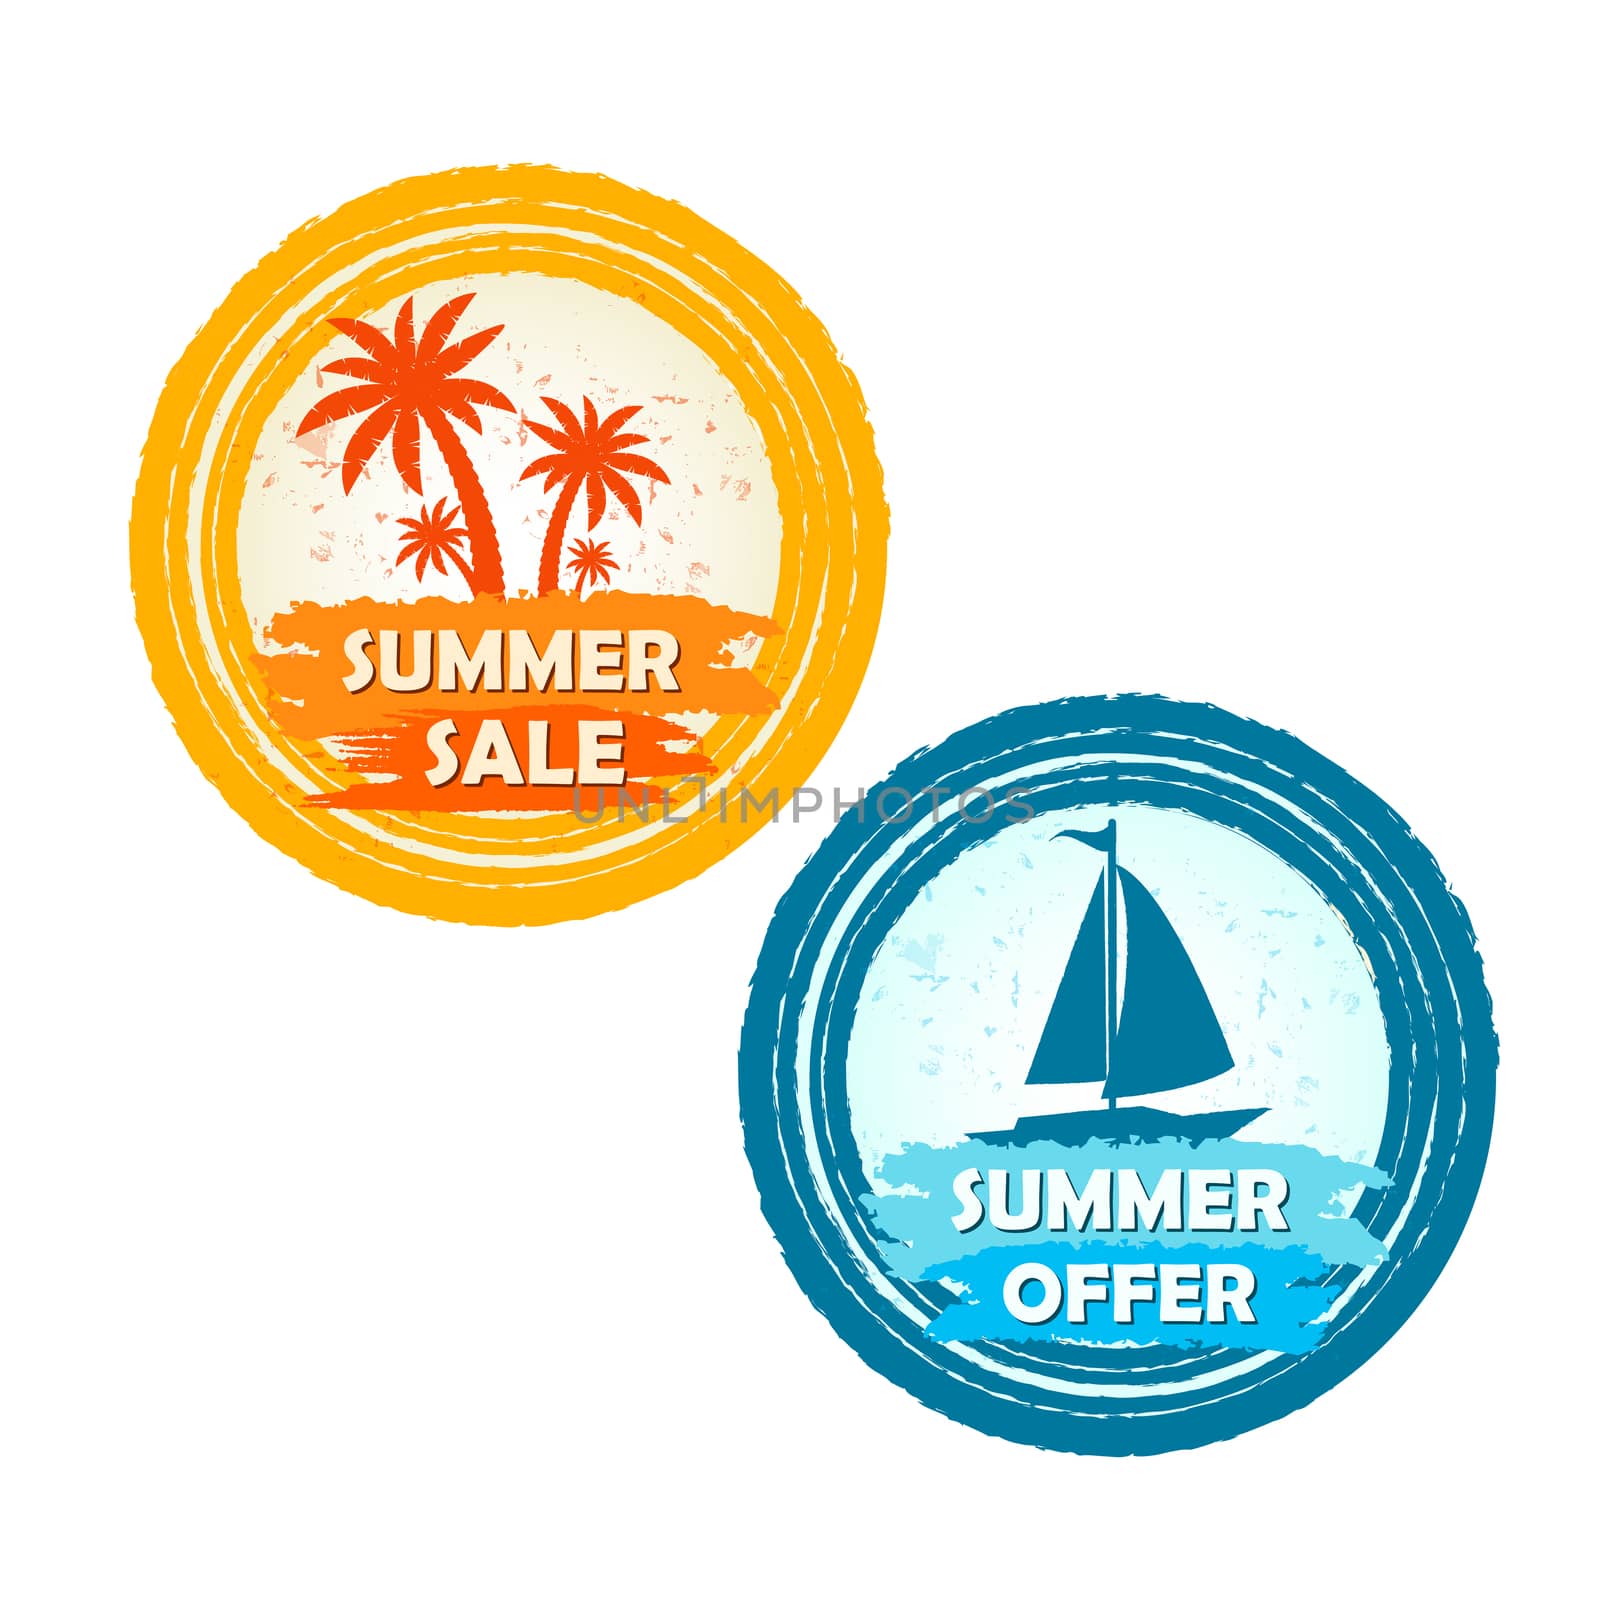 summer sale and offer with palms and boat signs, round drawn lab by marinini